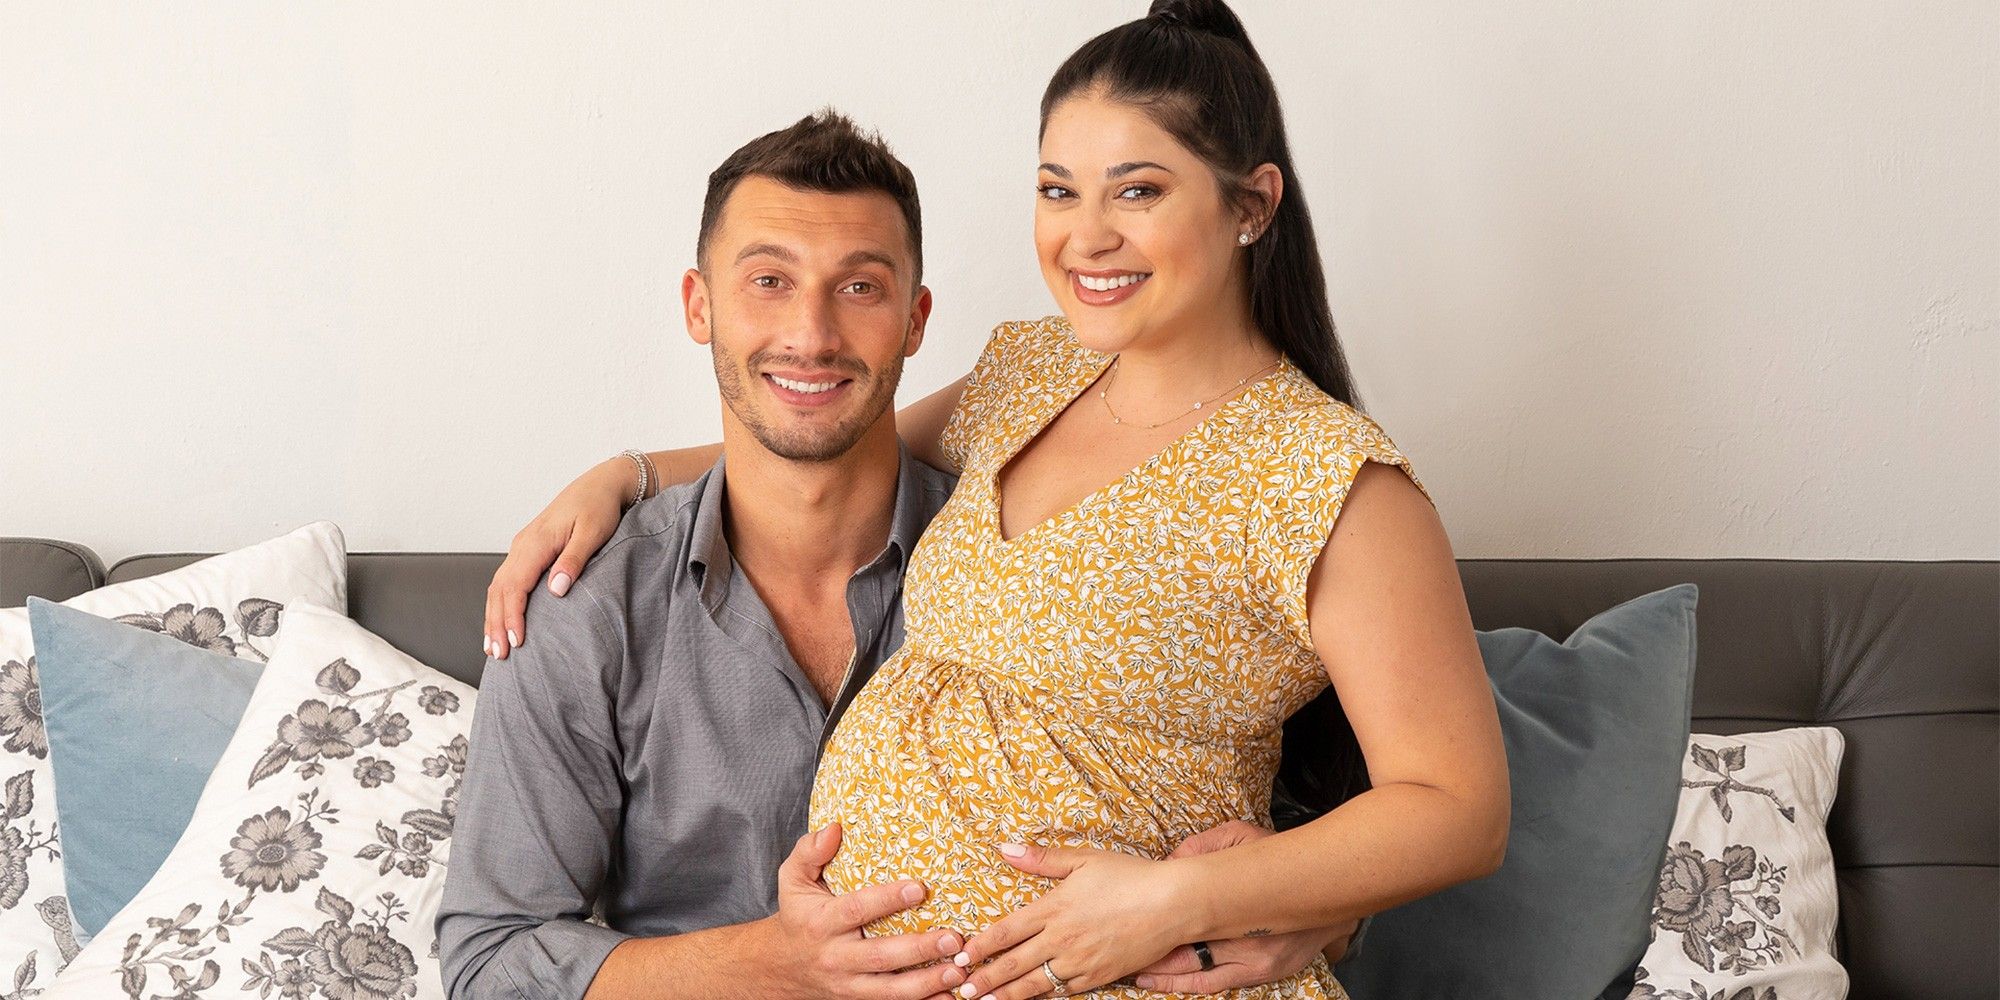 90 Day Fiancé: Loren Shocks With Post-Baby Weight Loss In Glam Photos